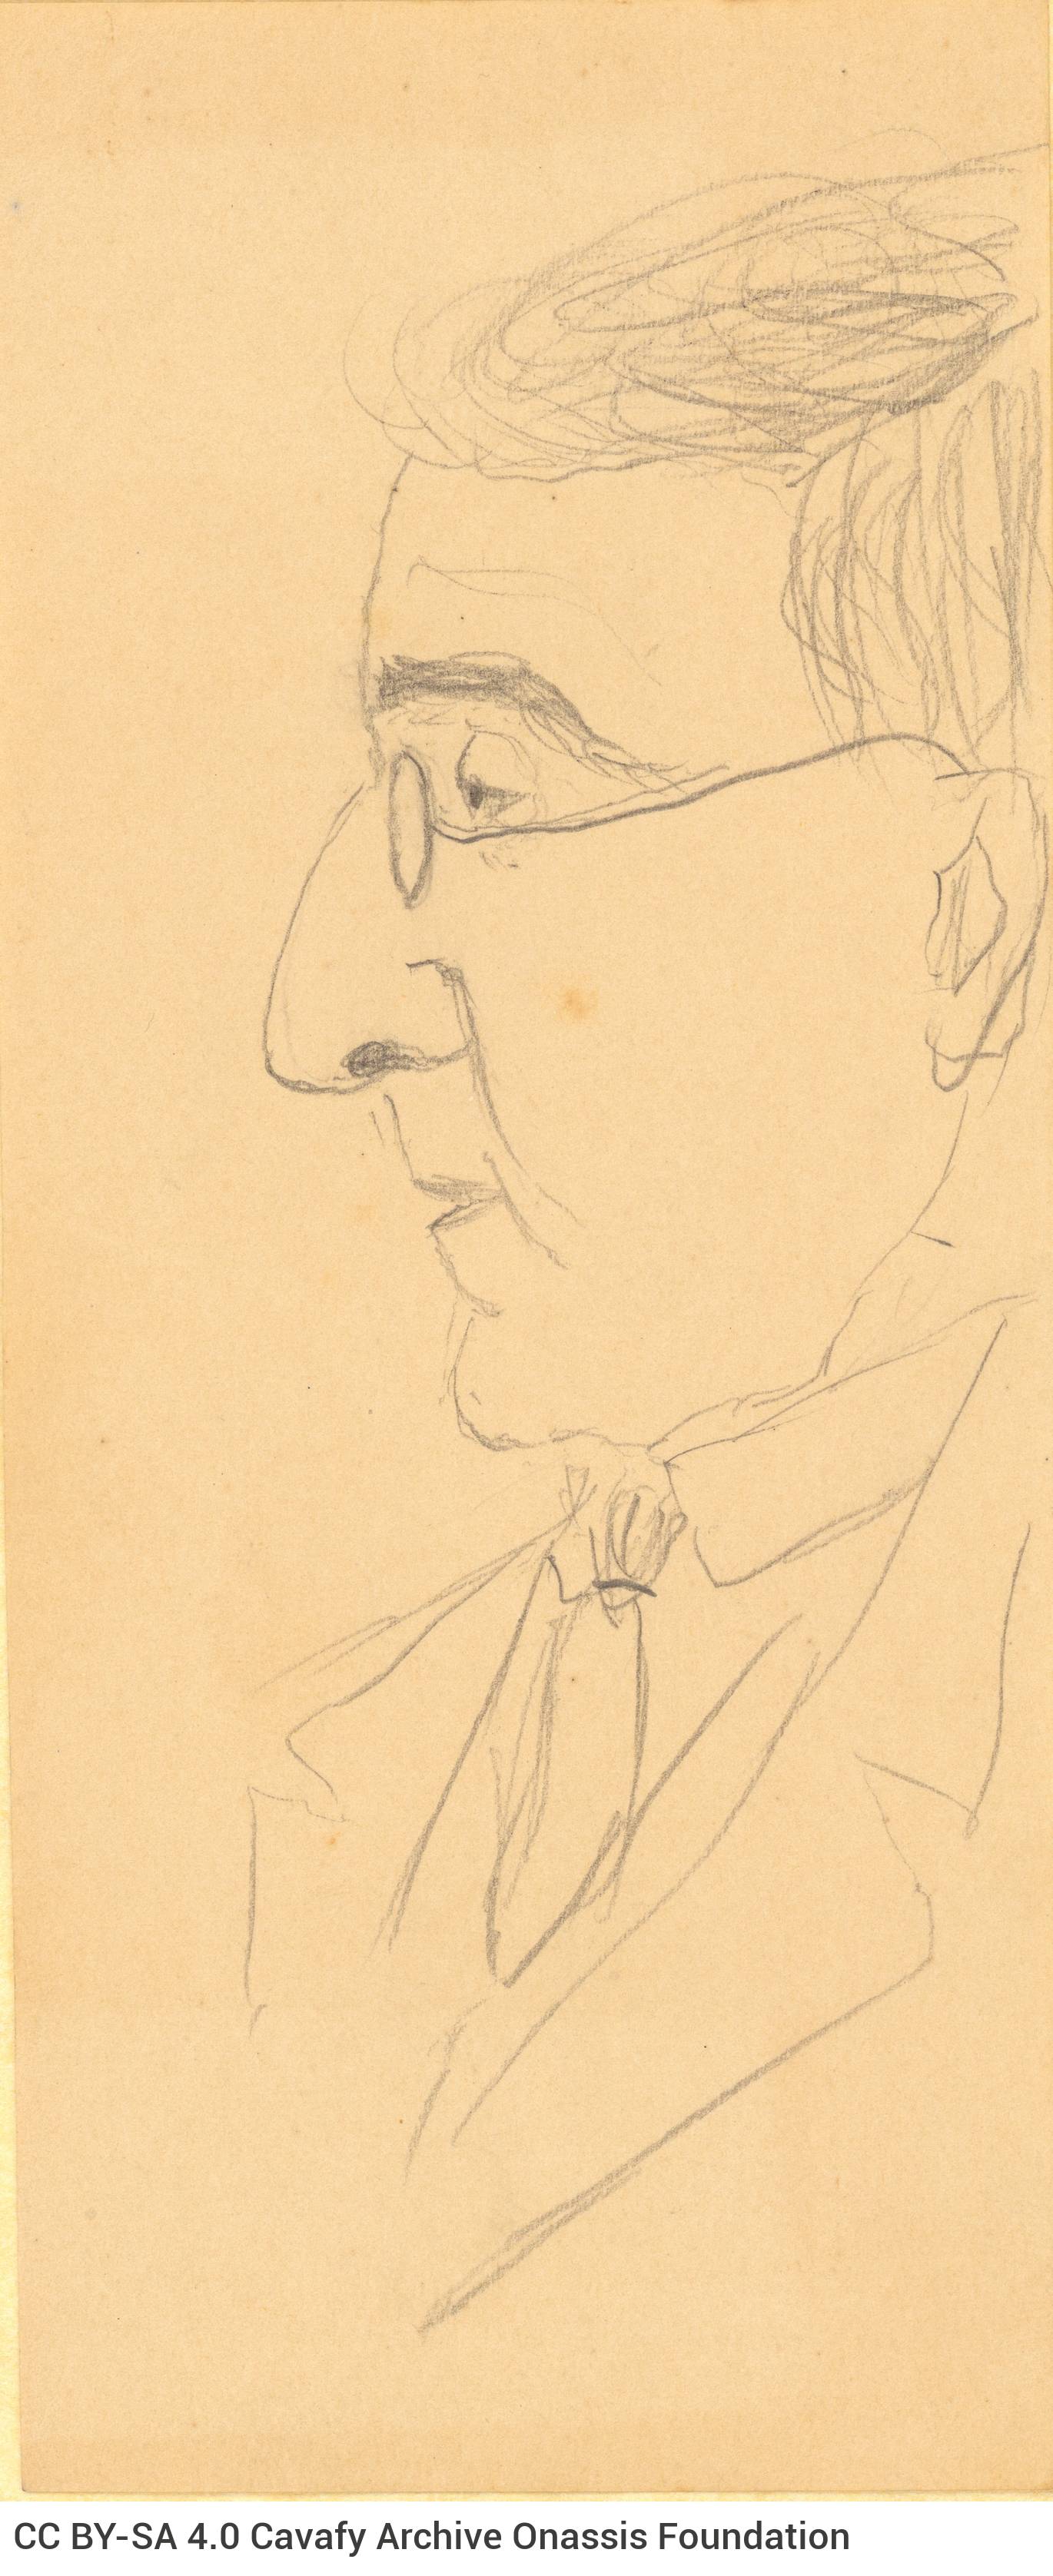 Two sketches in pencil on one side of pieces of paper. They both depict Cavafy in profile view, looking to the left. They are